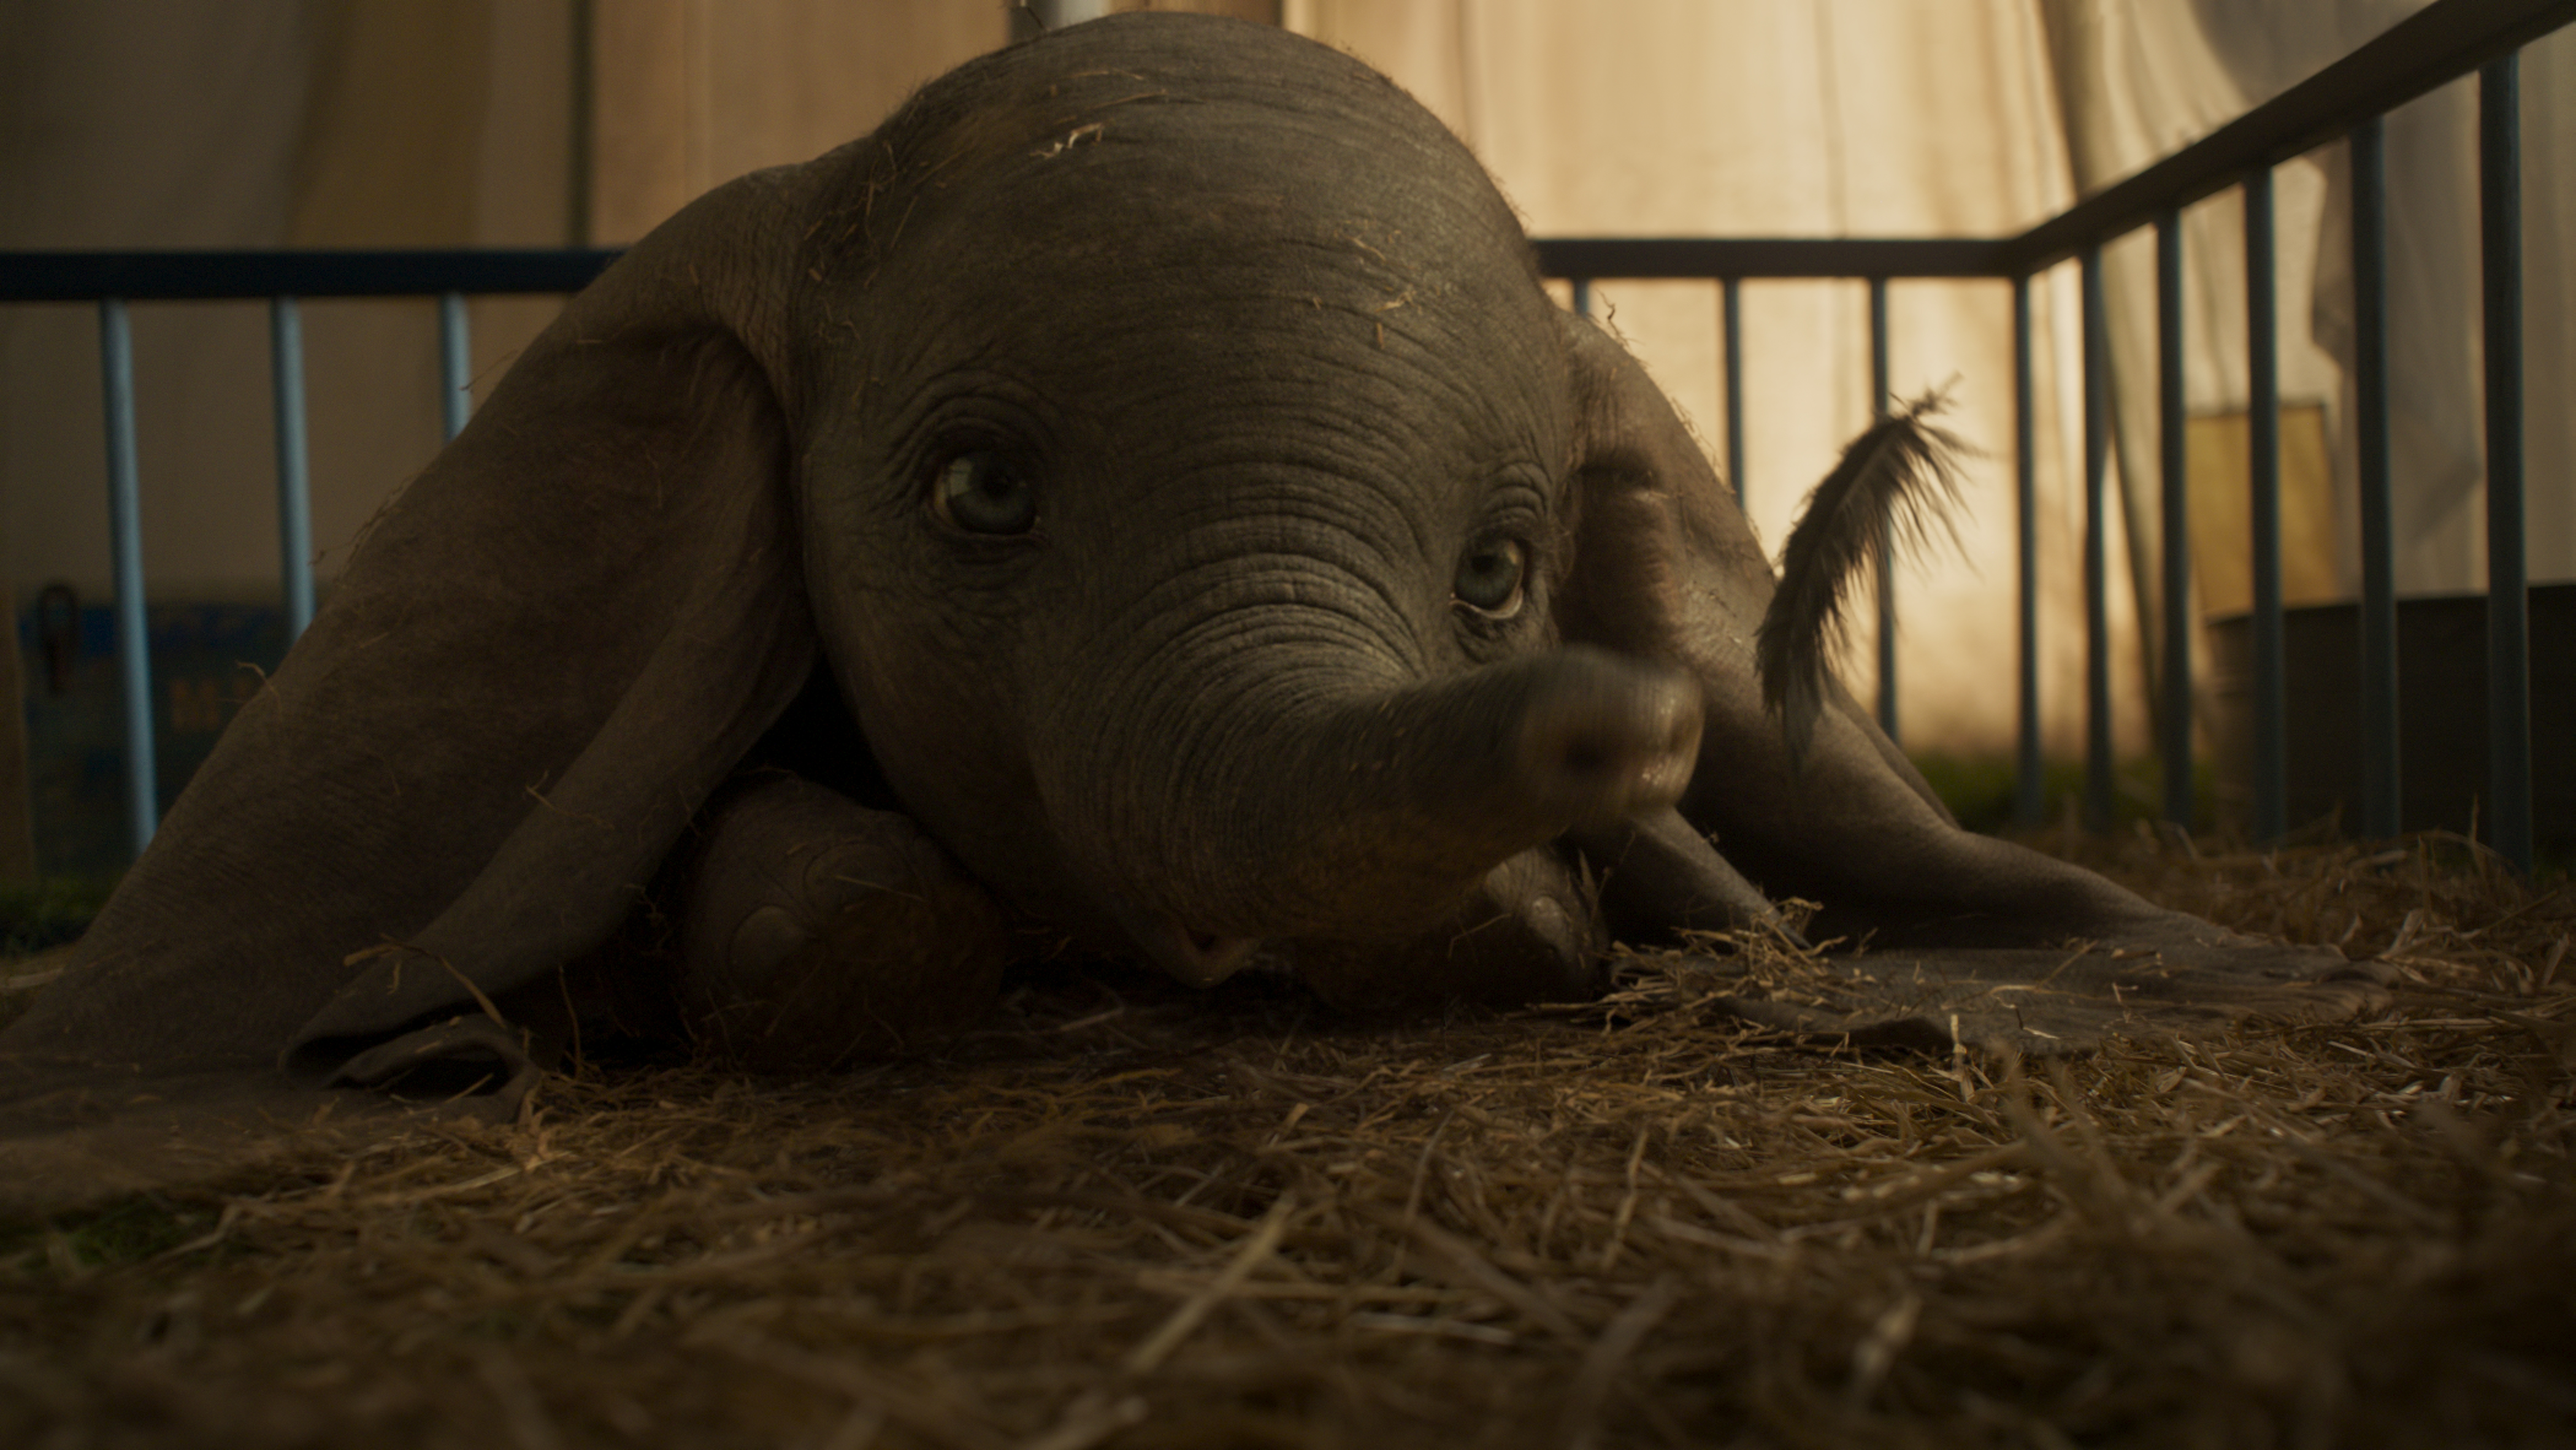 Disney Releases New Trailer, Poster, and Images for Dumbo!